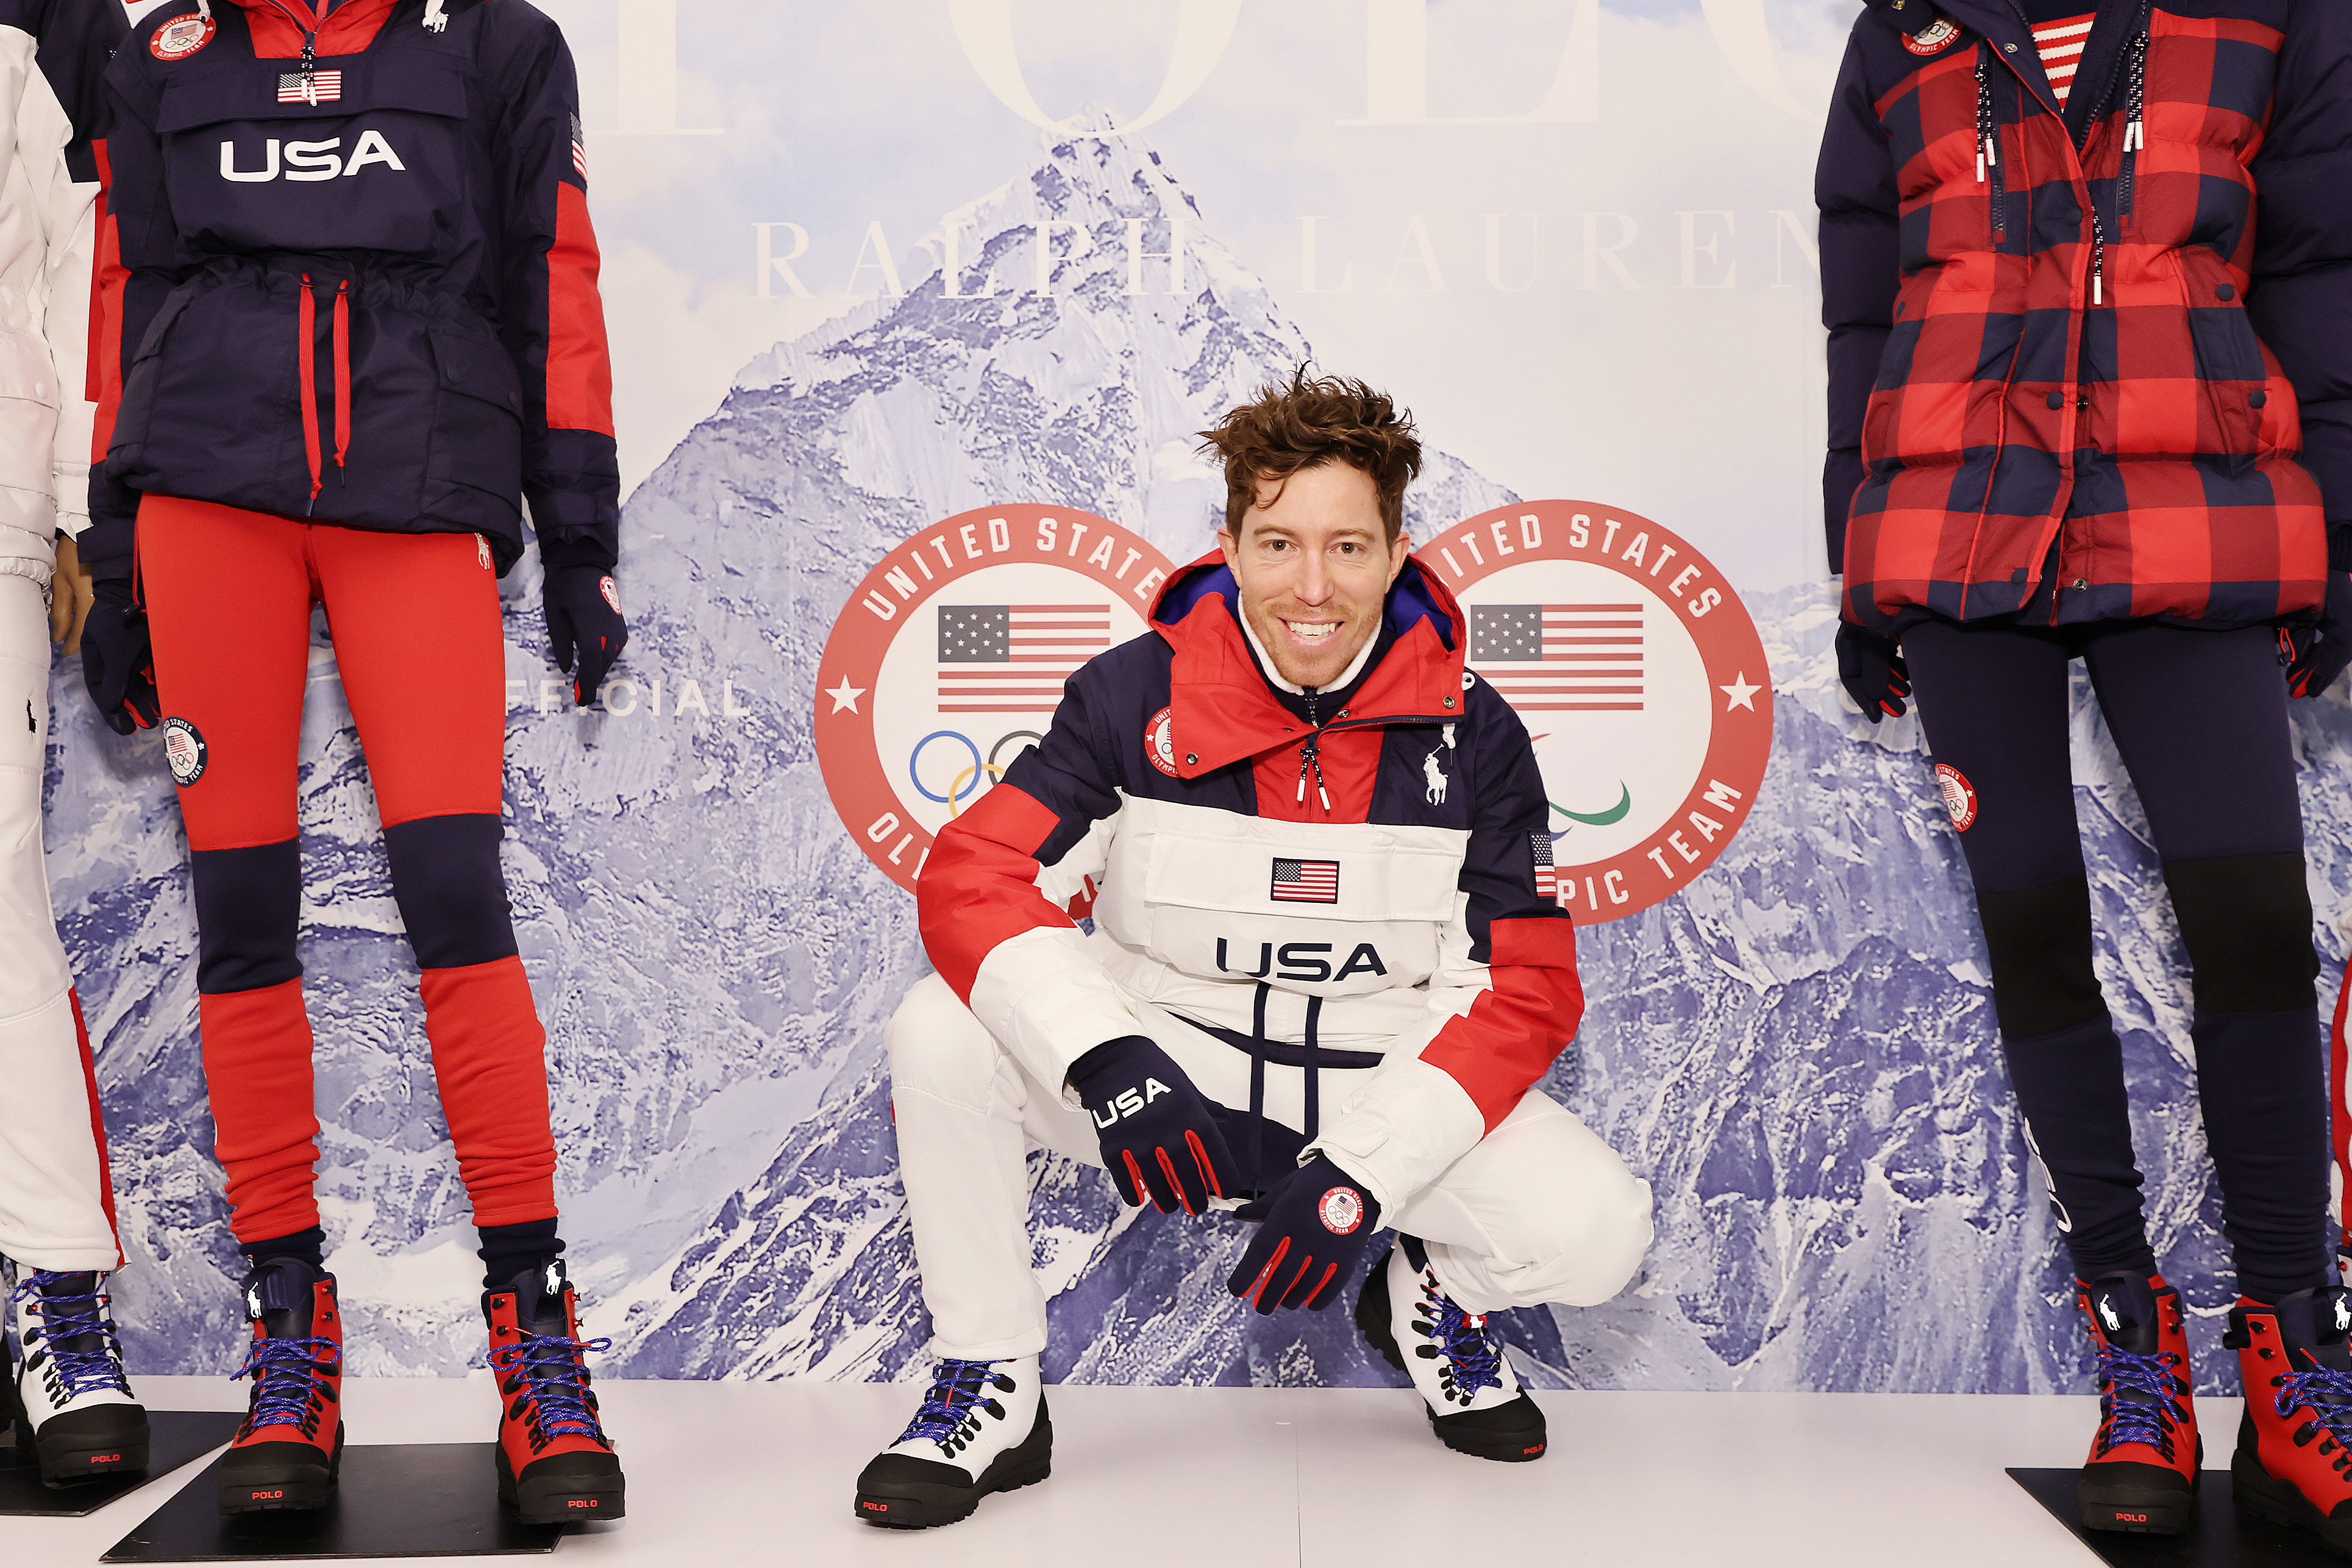 How to watch Shaun White in the Winter Olympics 2022